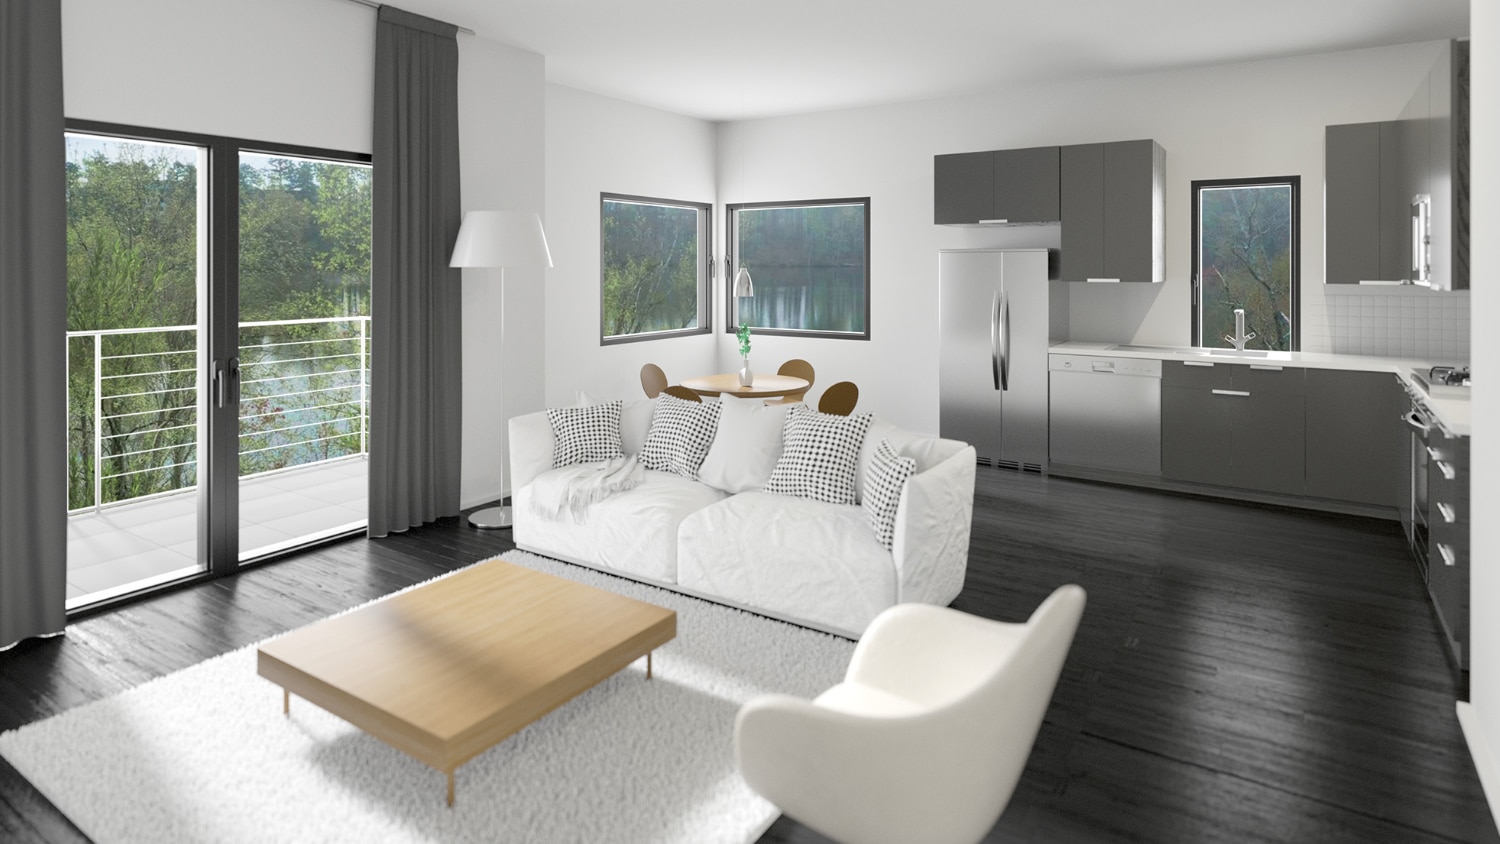 A chic living room in LakeShore Raleigh, a condo community on Centennial Campus.